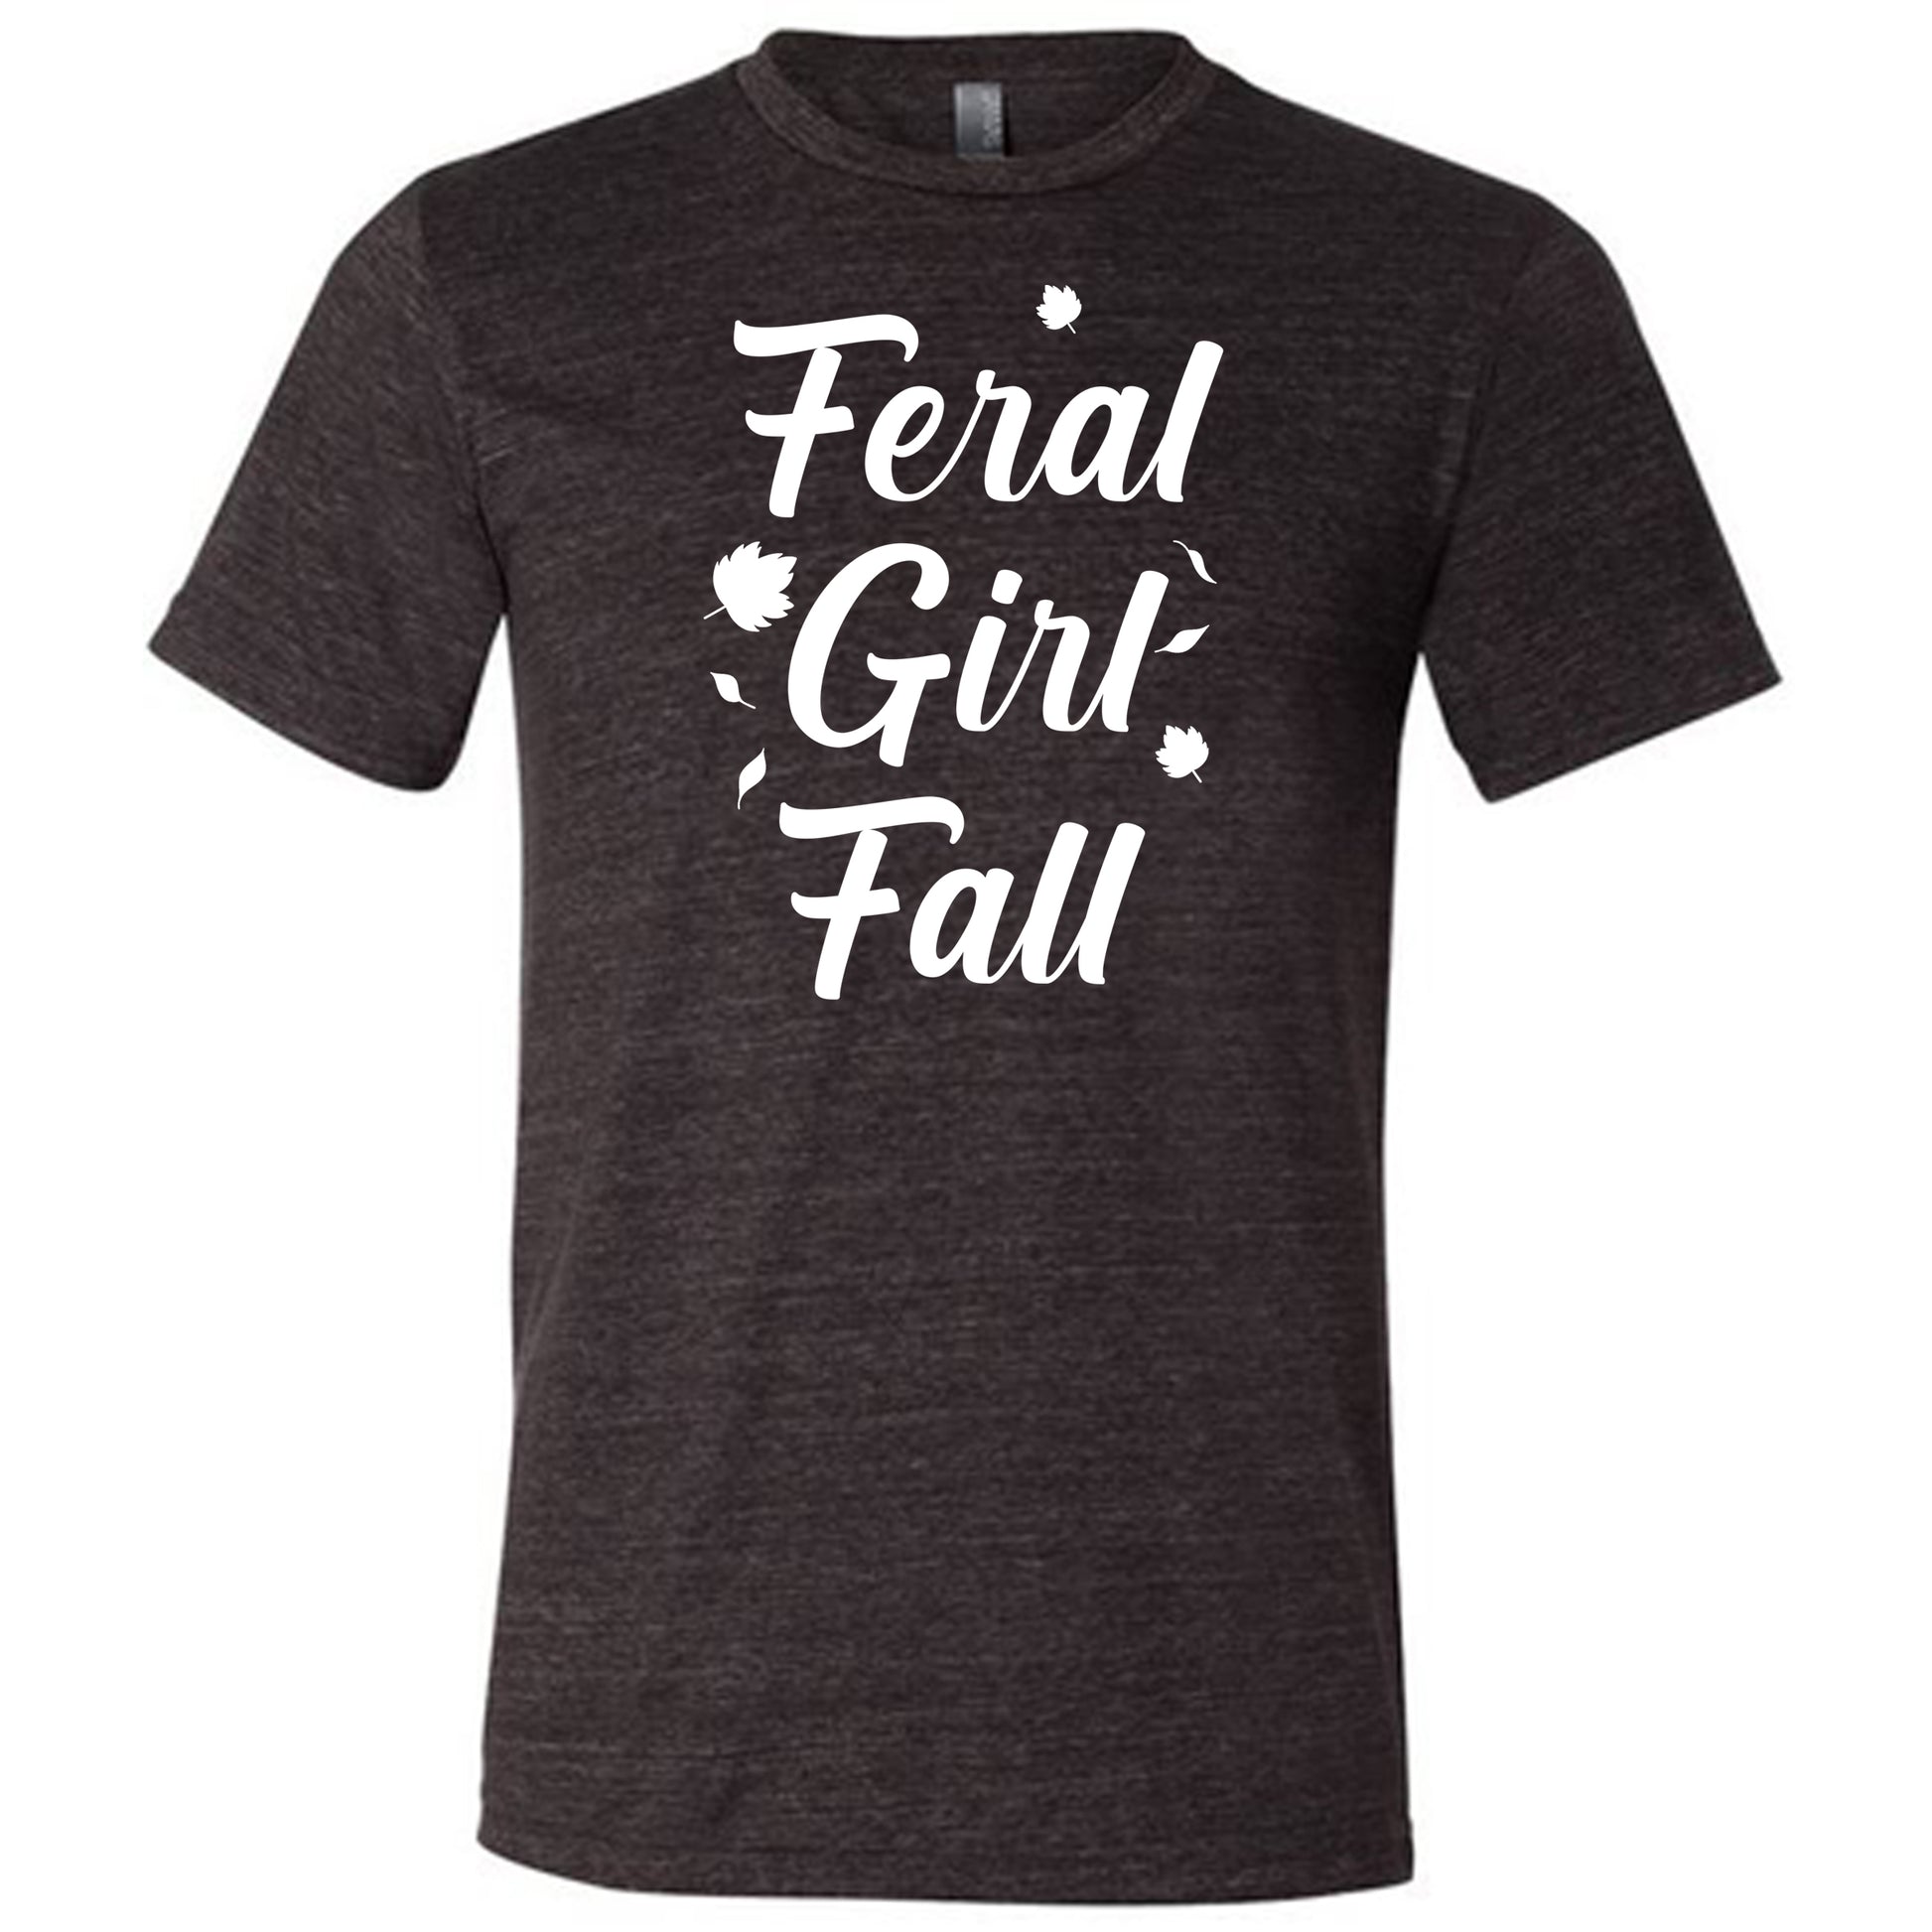 white quote "Feral Girl Fall" on a black shirt